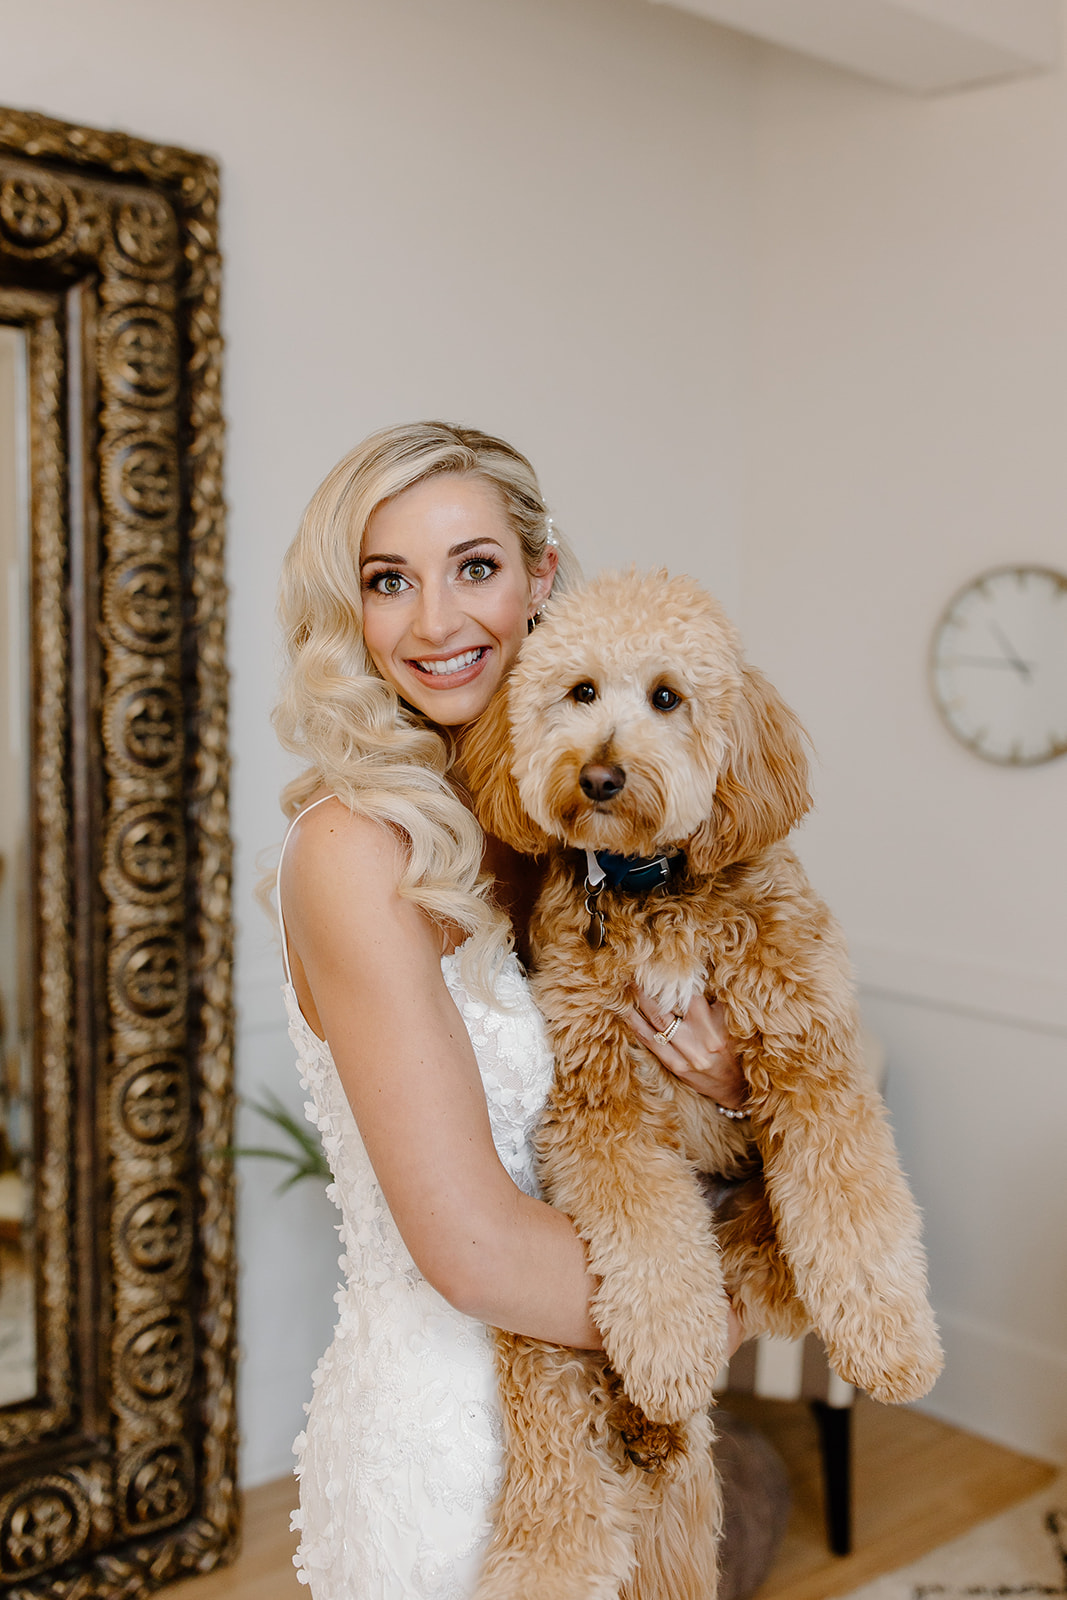 Bride poses in her wedding dress while holding her dog.